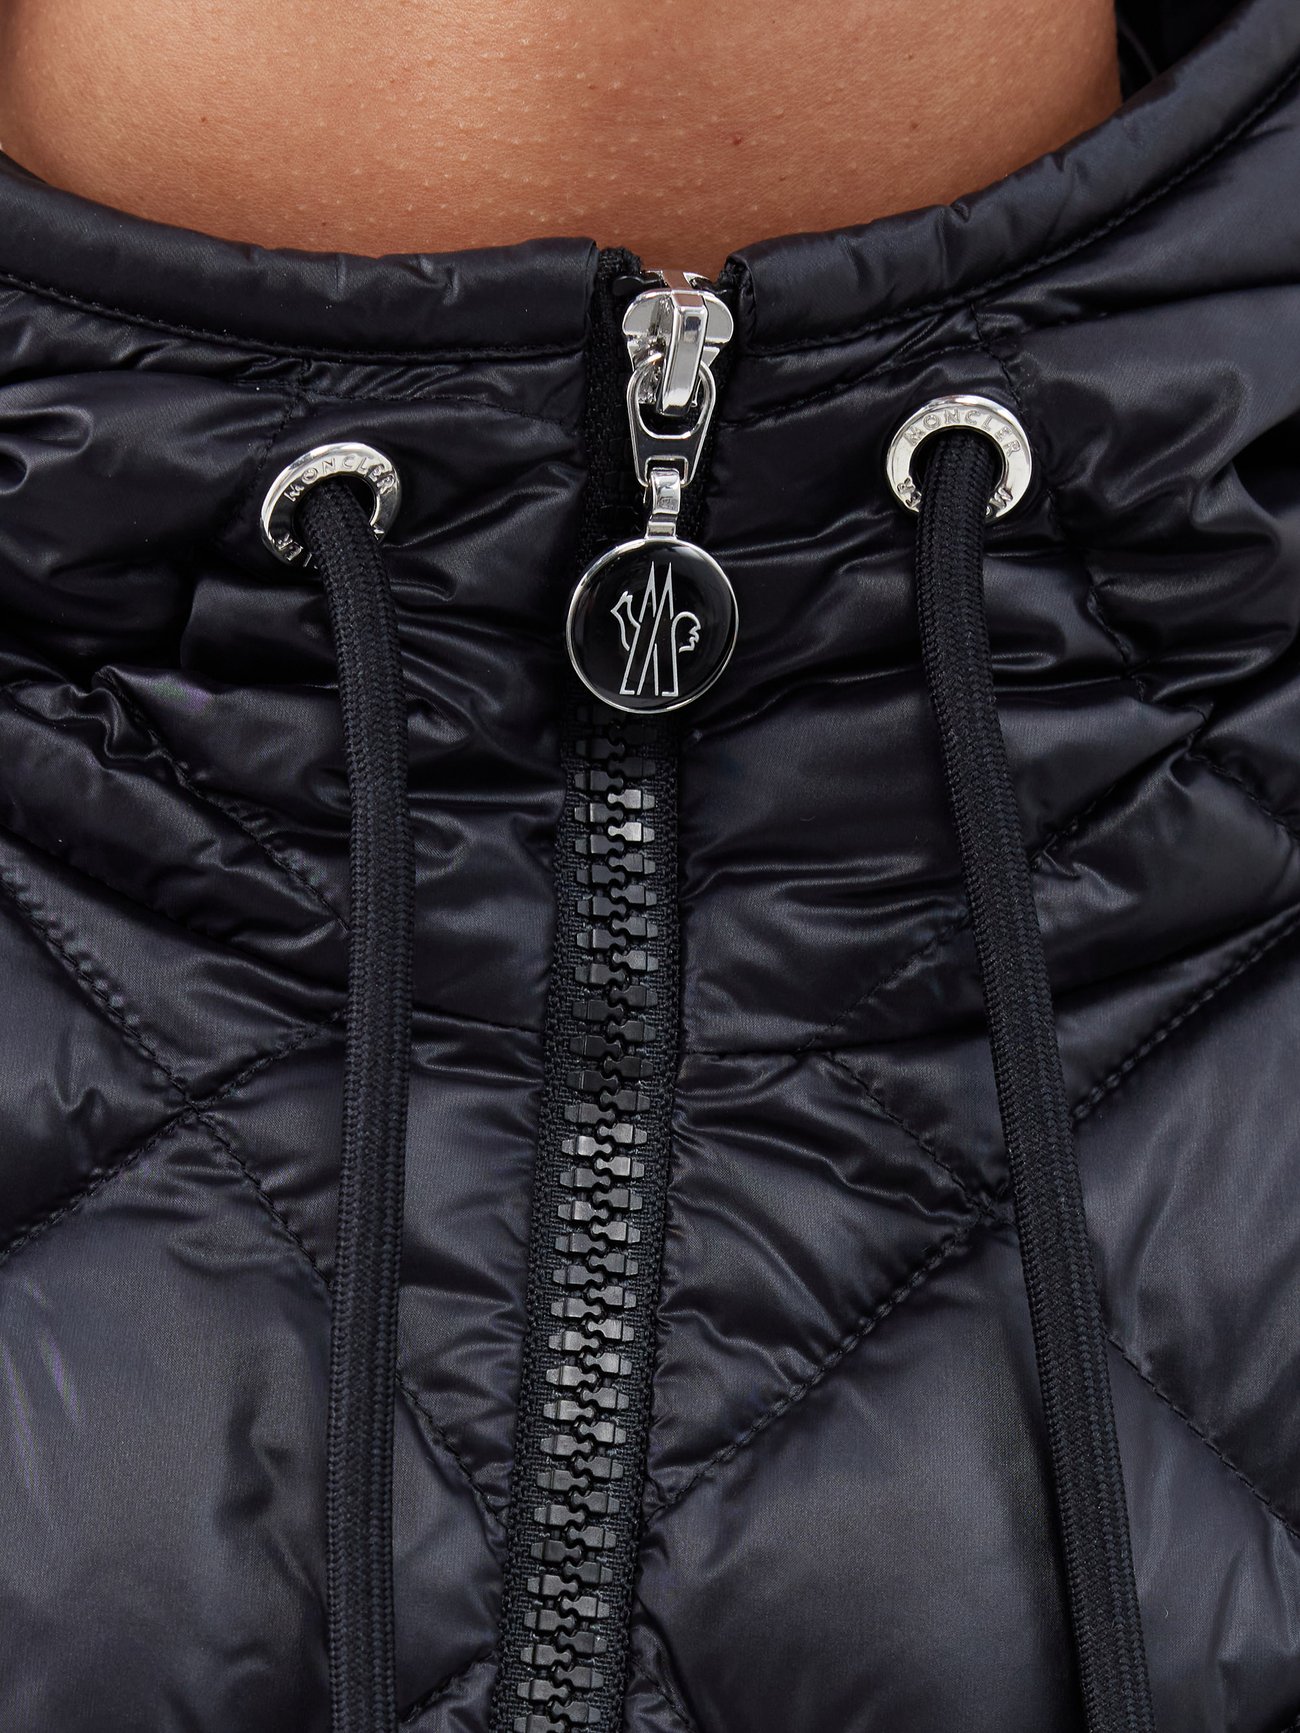 Moncler Diamond-quilted Down Hooded Jacket - Black